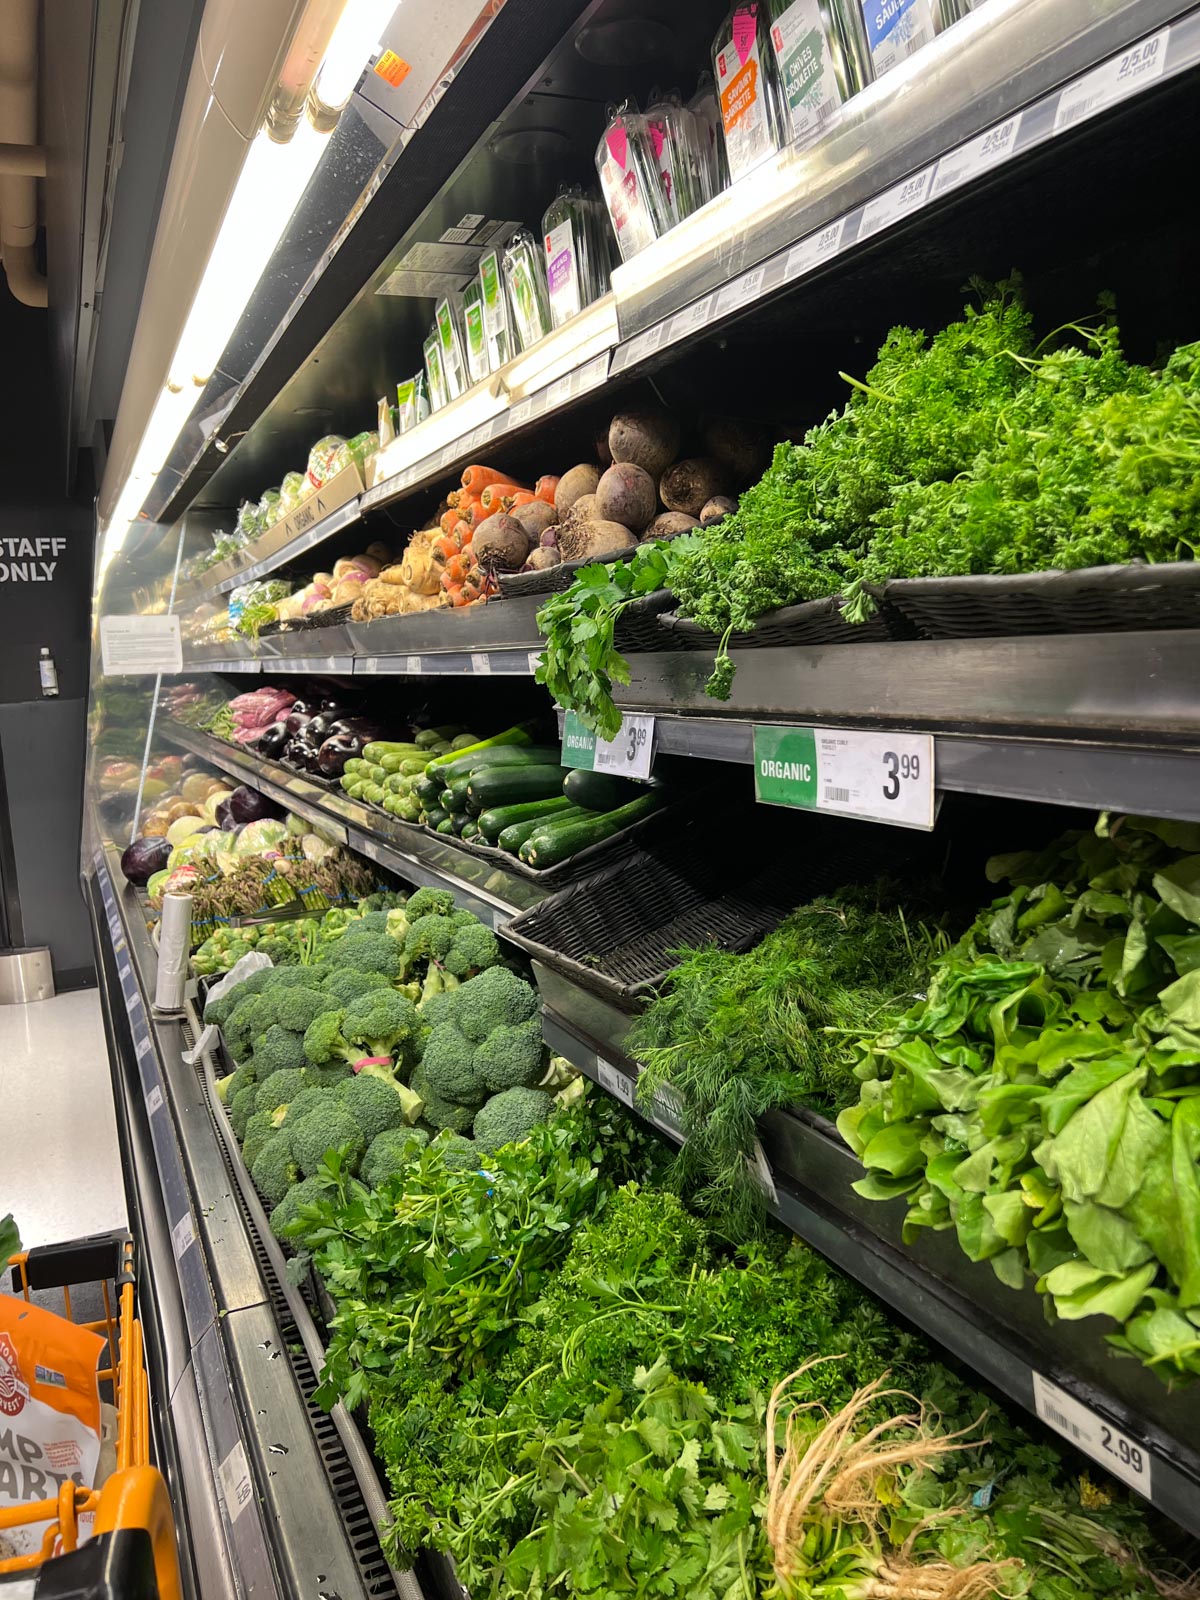 The produce aisle of the grocery store with greens, herbs and broccoli visible.